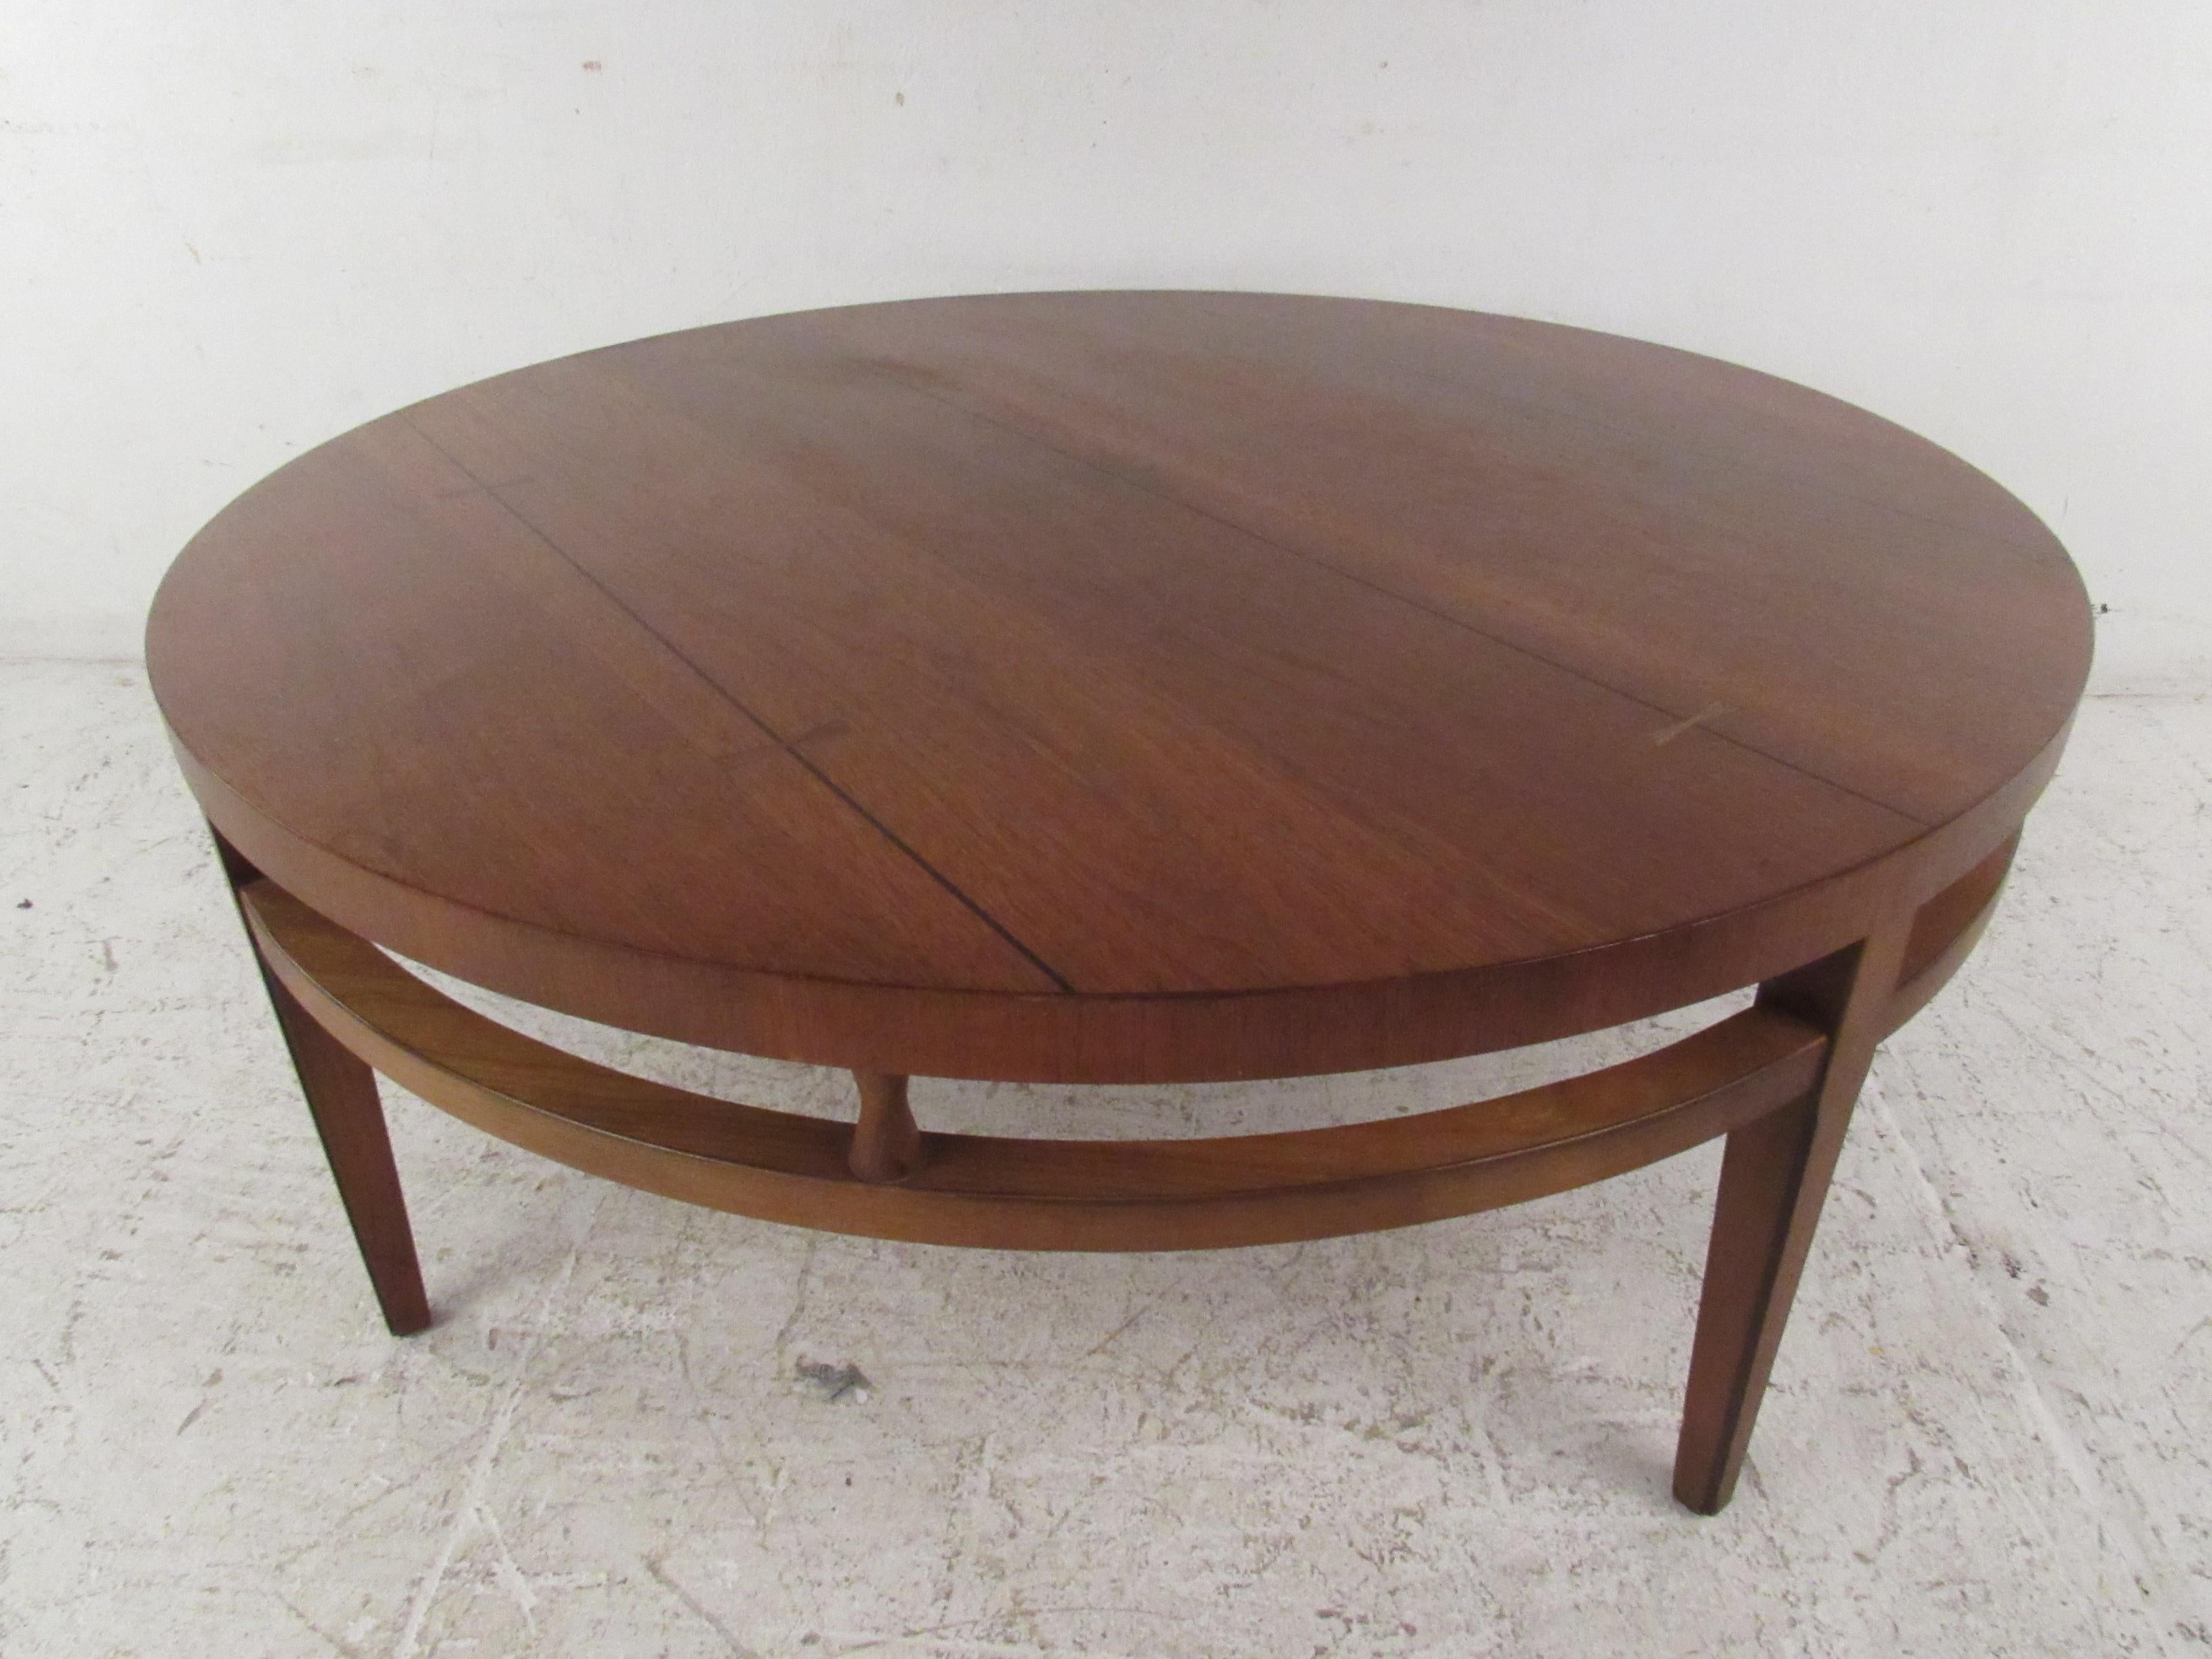 This stunning vintage modern coffee table boasts a circular shape with a stretcher wrapping all the way around. A sleek design with sculpted hourglass fixtures placed between the top and the stretcher. This handsome piece with a vintage walnut